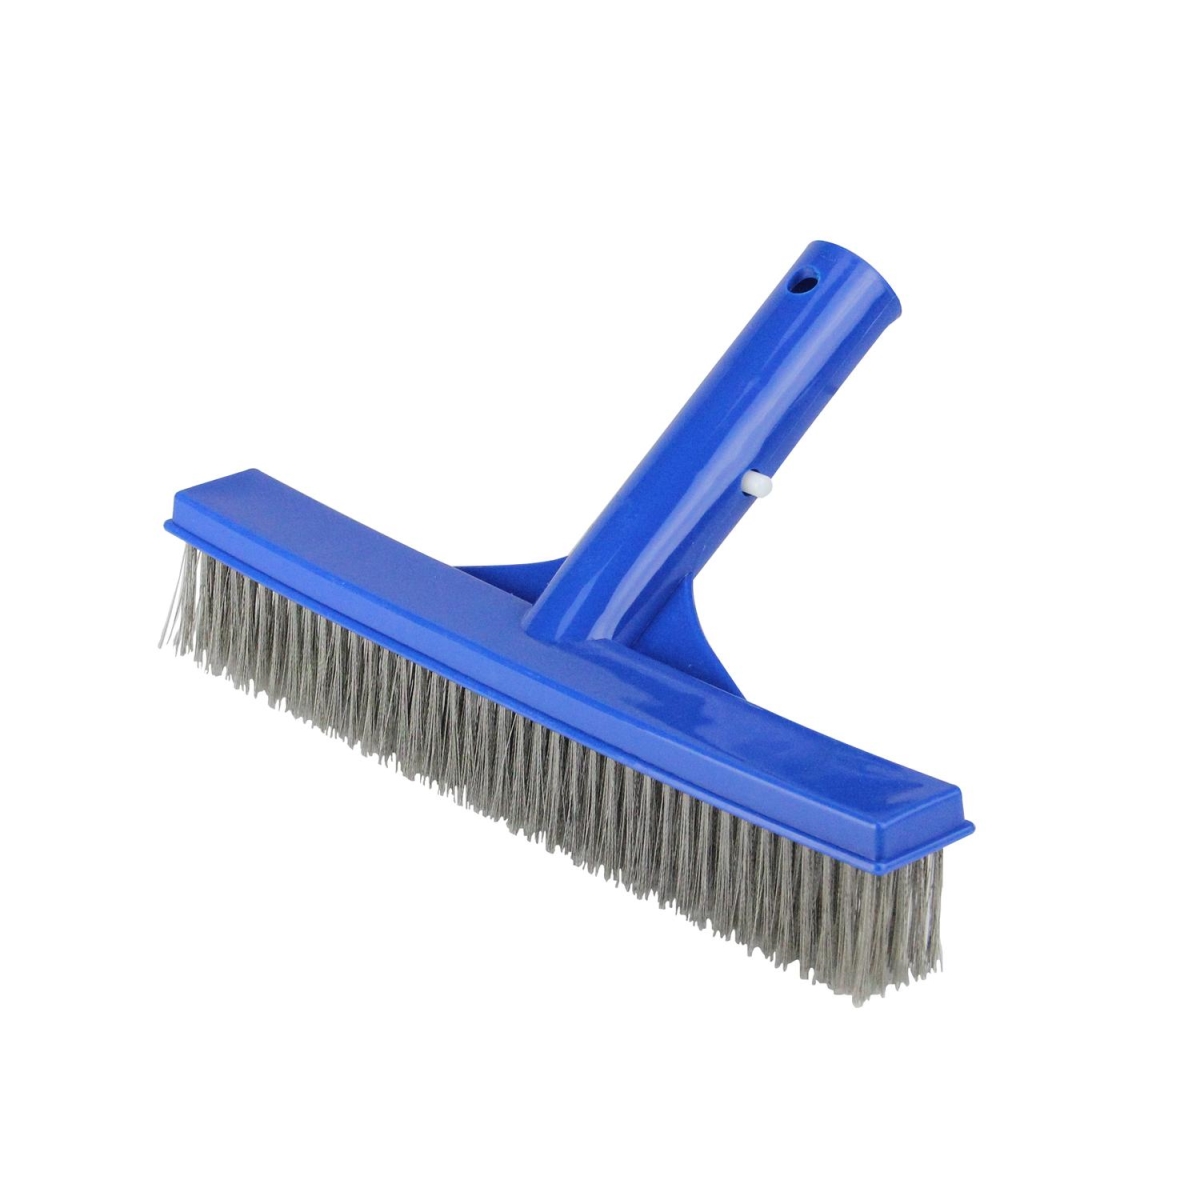 32756944 9.75 In. Blue Stainless Steel Algae Brush For Cement Pools